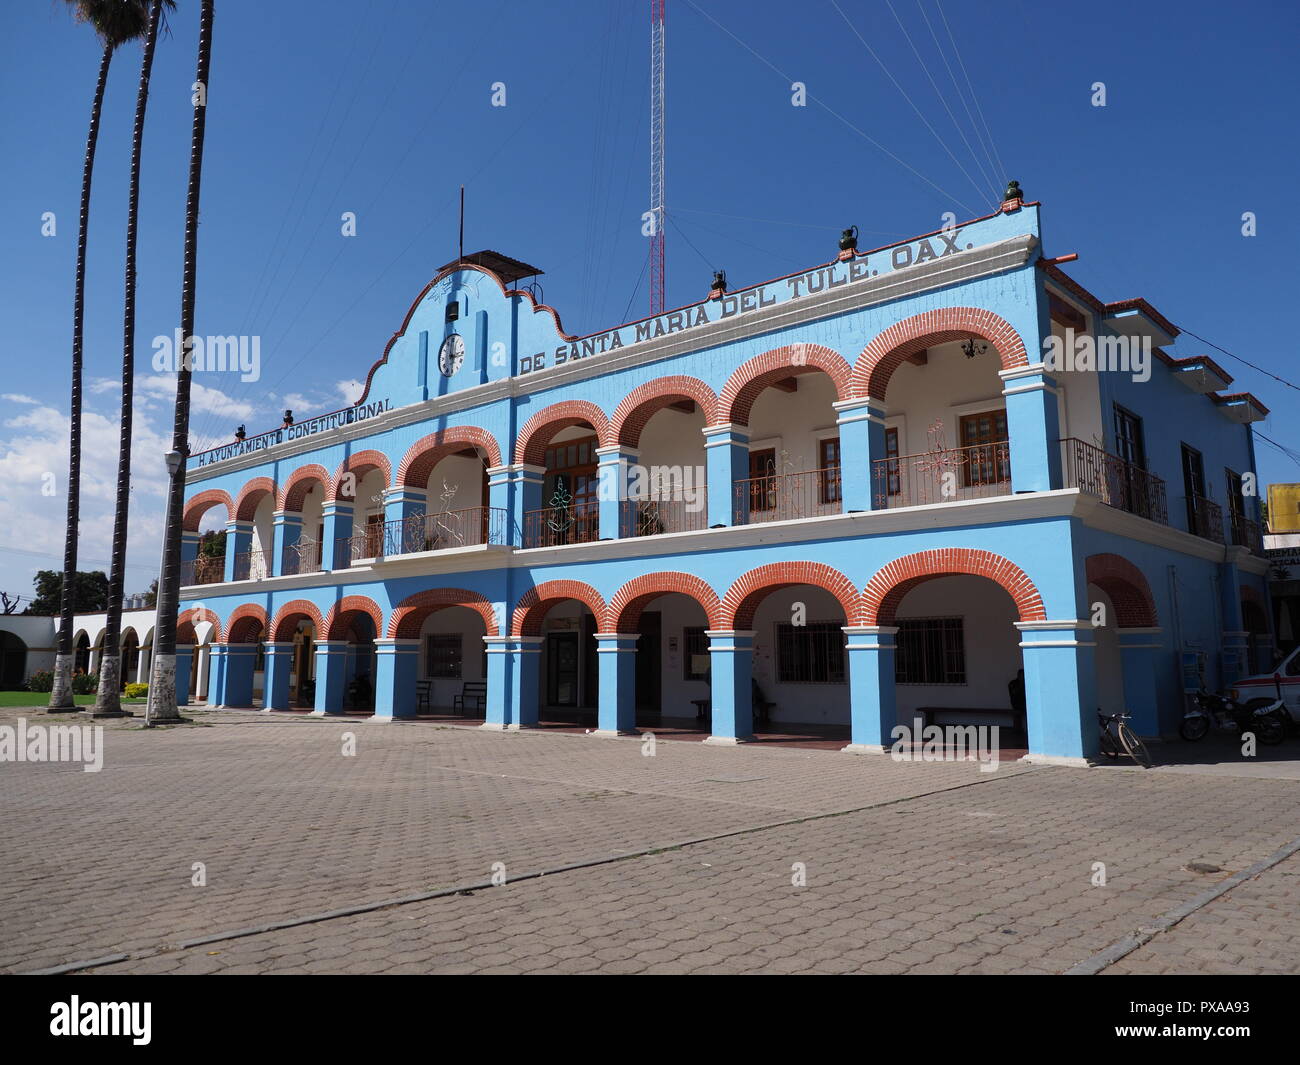 SANTA MARIA del TULE, NORTH AMERICA MEXICO on FEBRUARY 2018: Exterior and side of town hall on main market square in mexican city center at Oaxaca sta Stock Photo